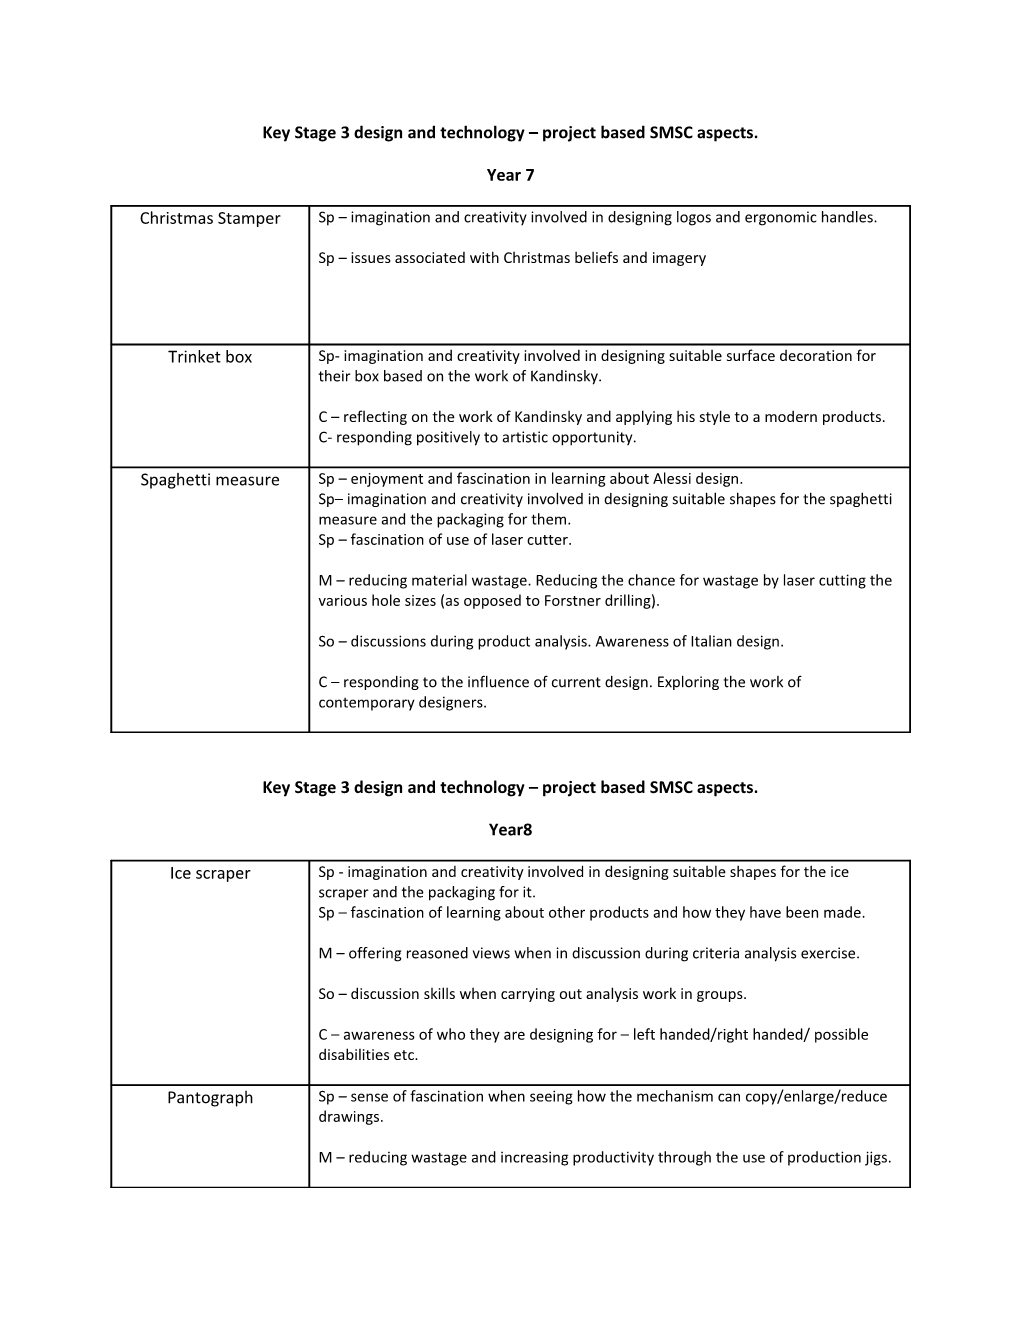 Key Stage 3 Design and Technology Project Based SMSC Aspects